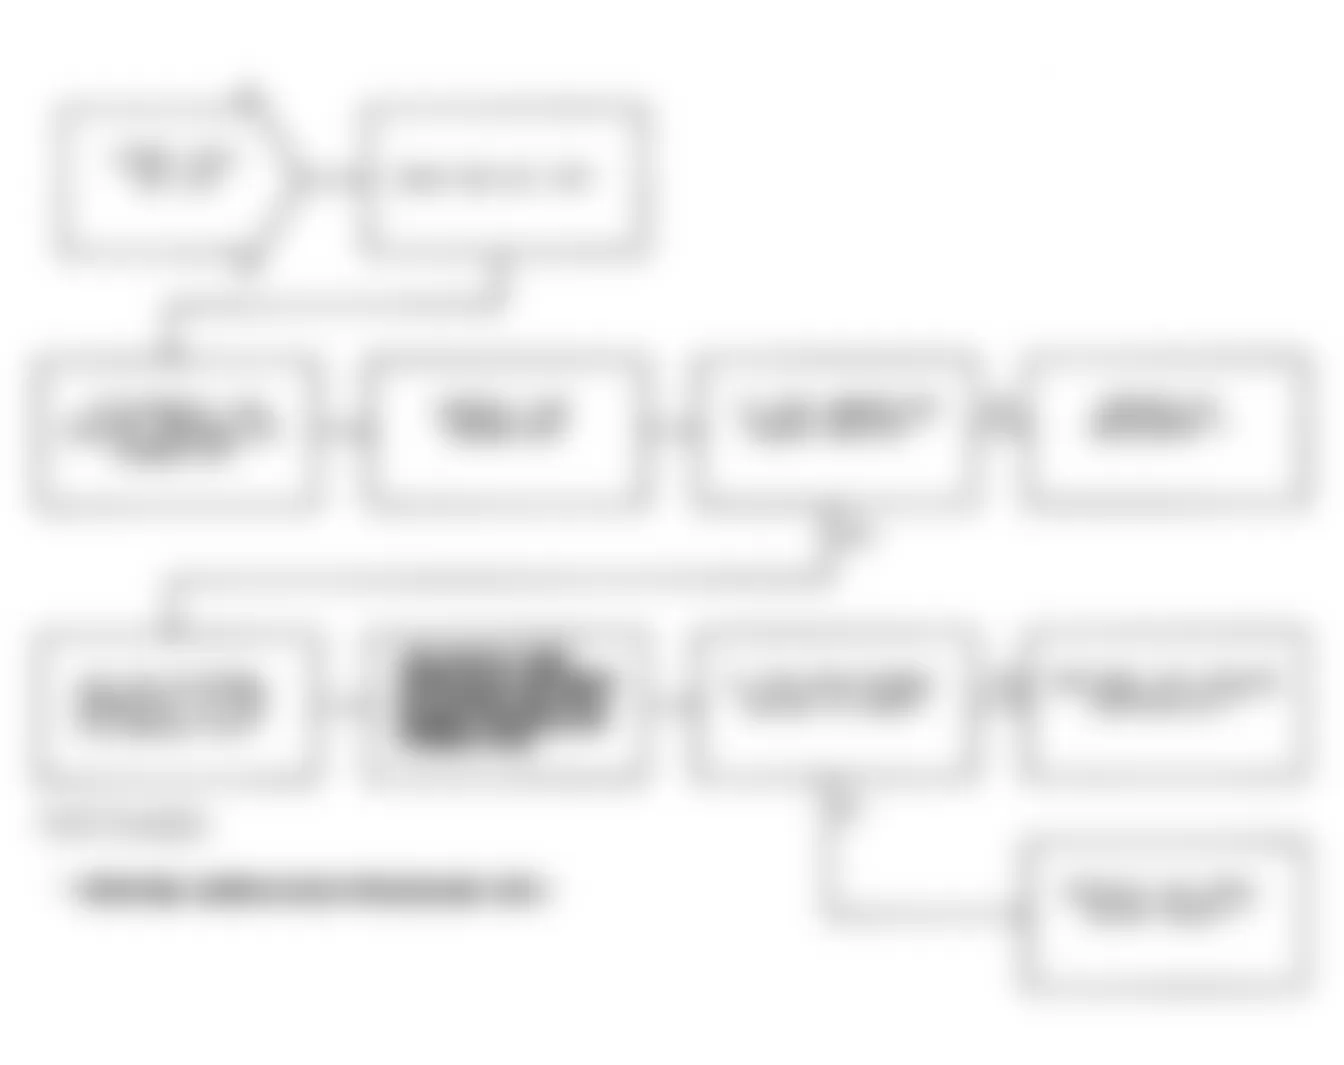 Chrysler Imperial 1991 - Component Locations -  Test NS-13D: Flowchart